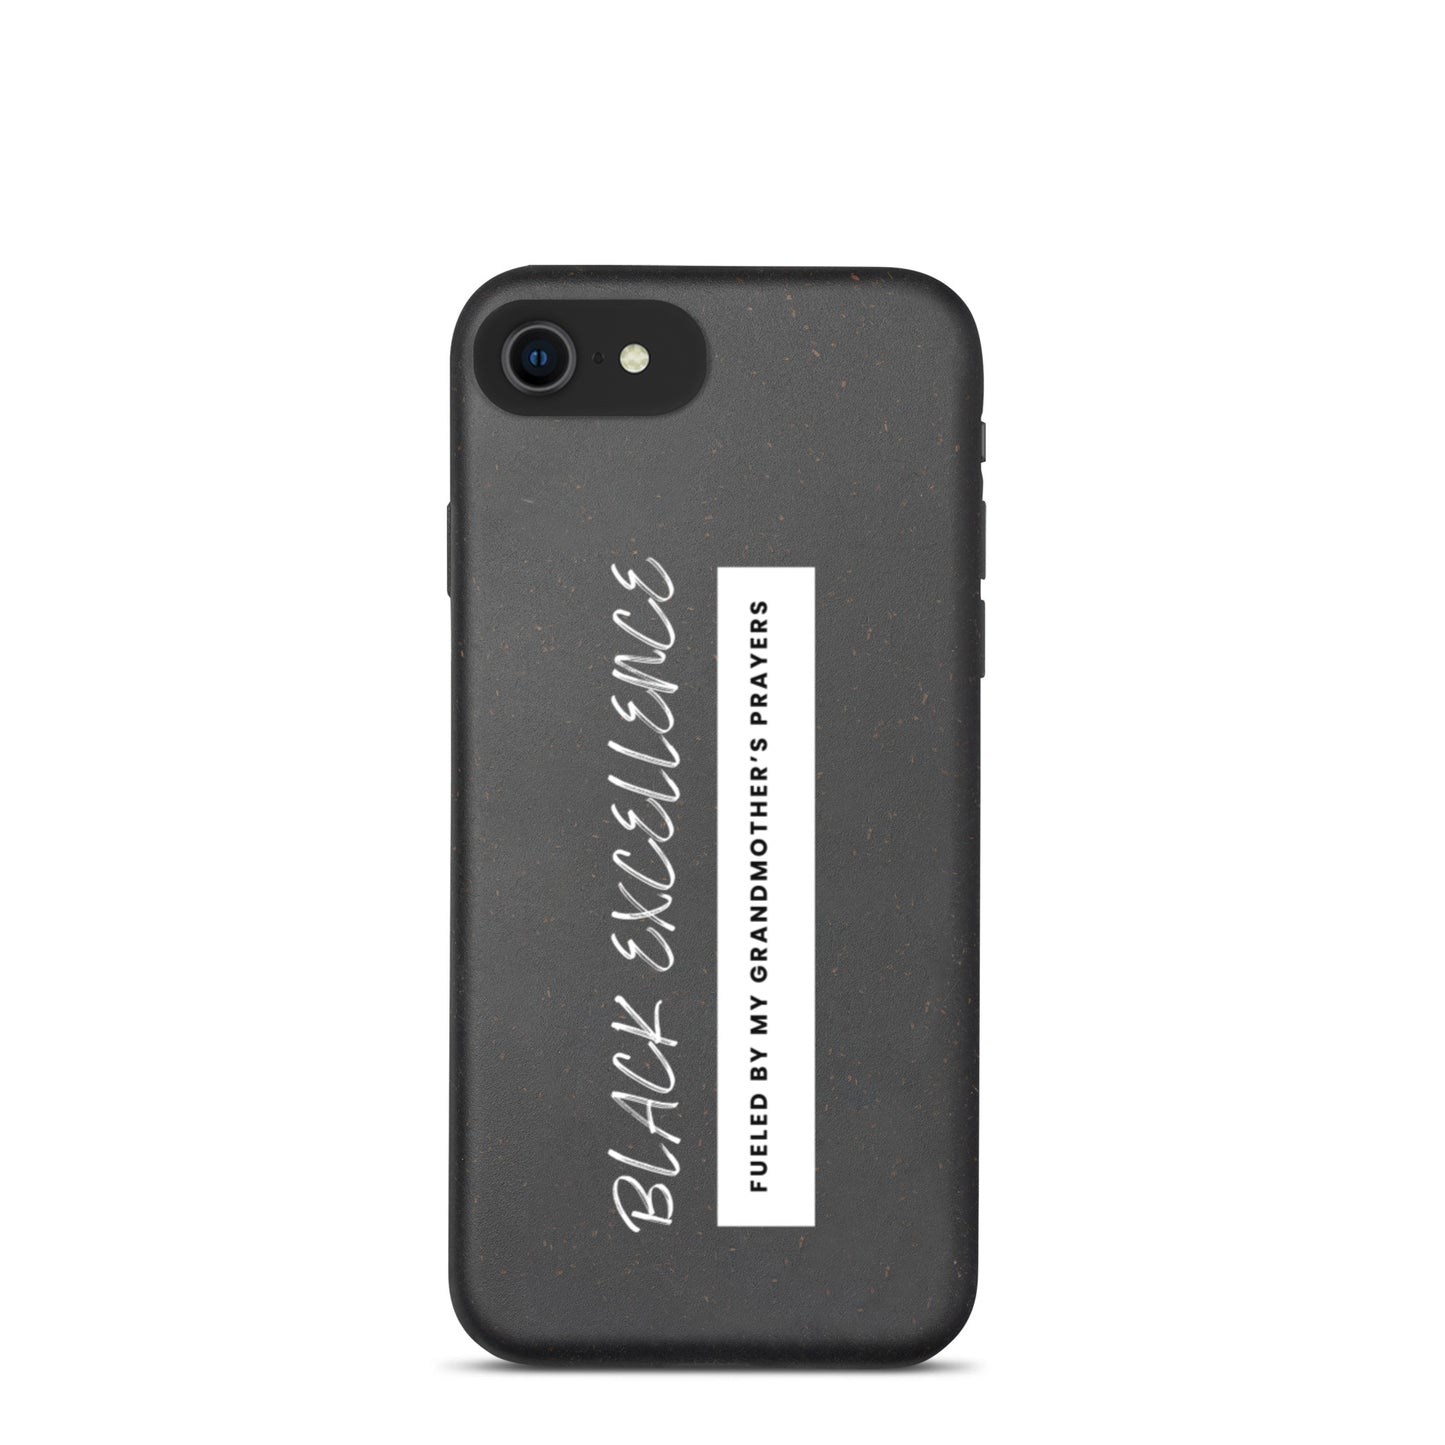 Fueled By My Grandmother's Prayers Speckled iPhone Case